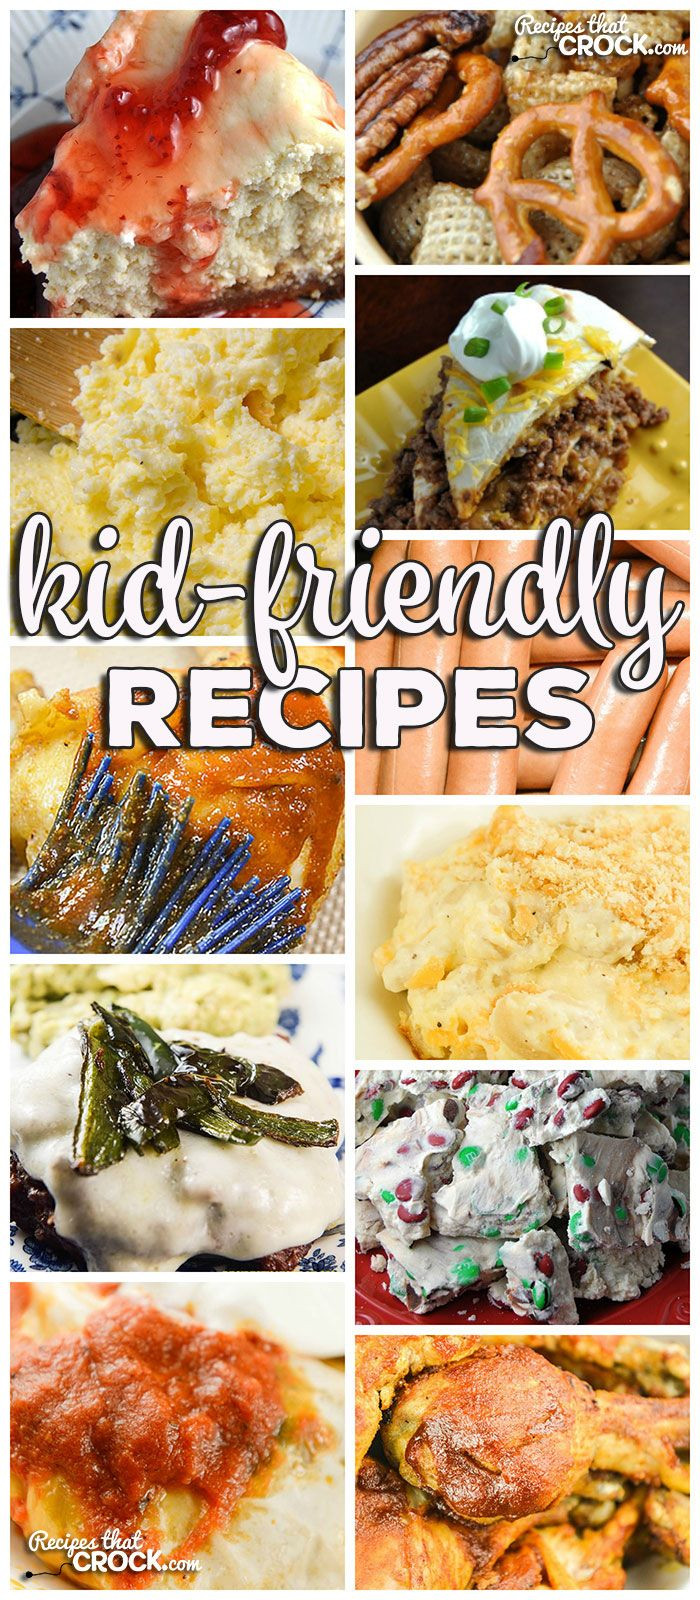 Crock Pot Recipes Kids Like
 This week for our Friday Favorites we have Kid Friendly